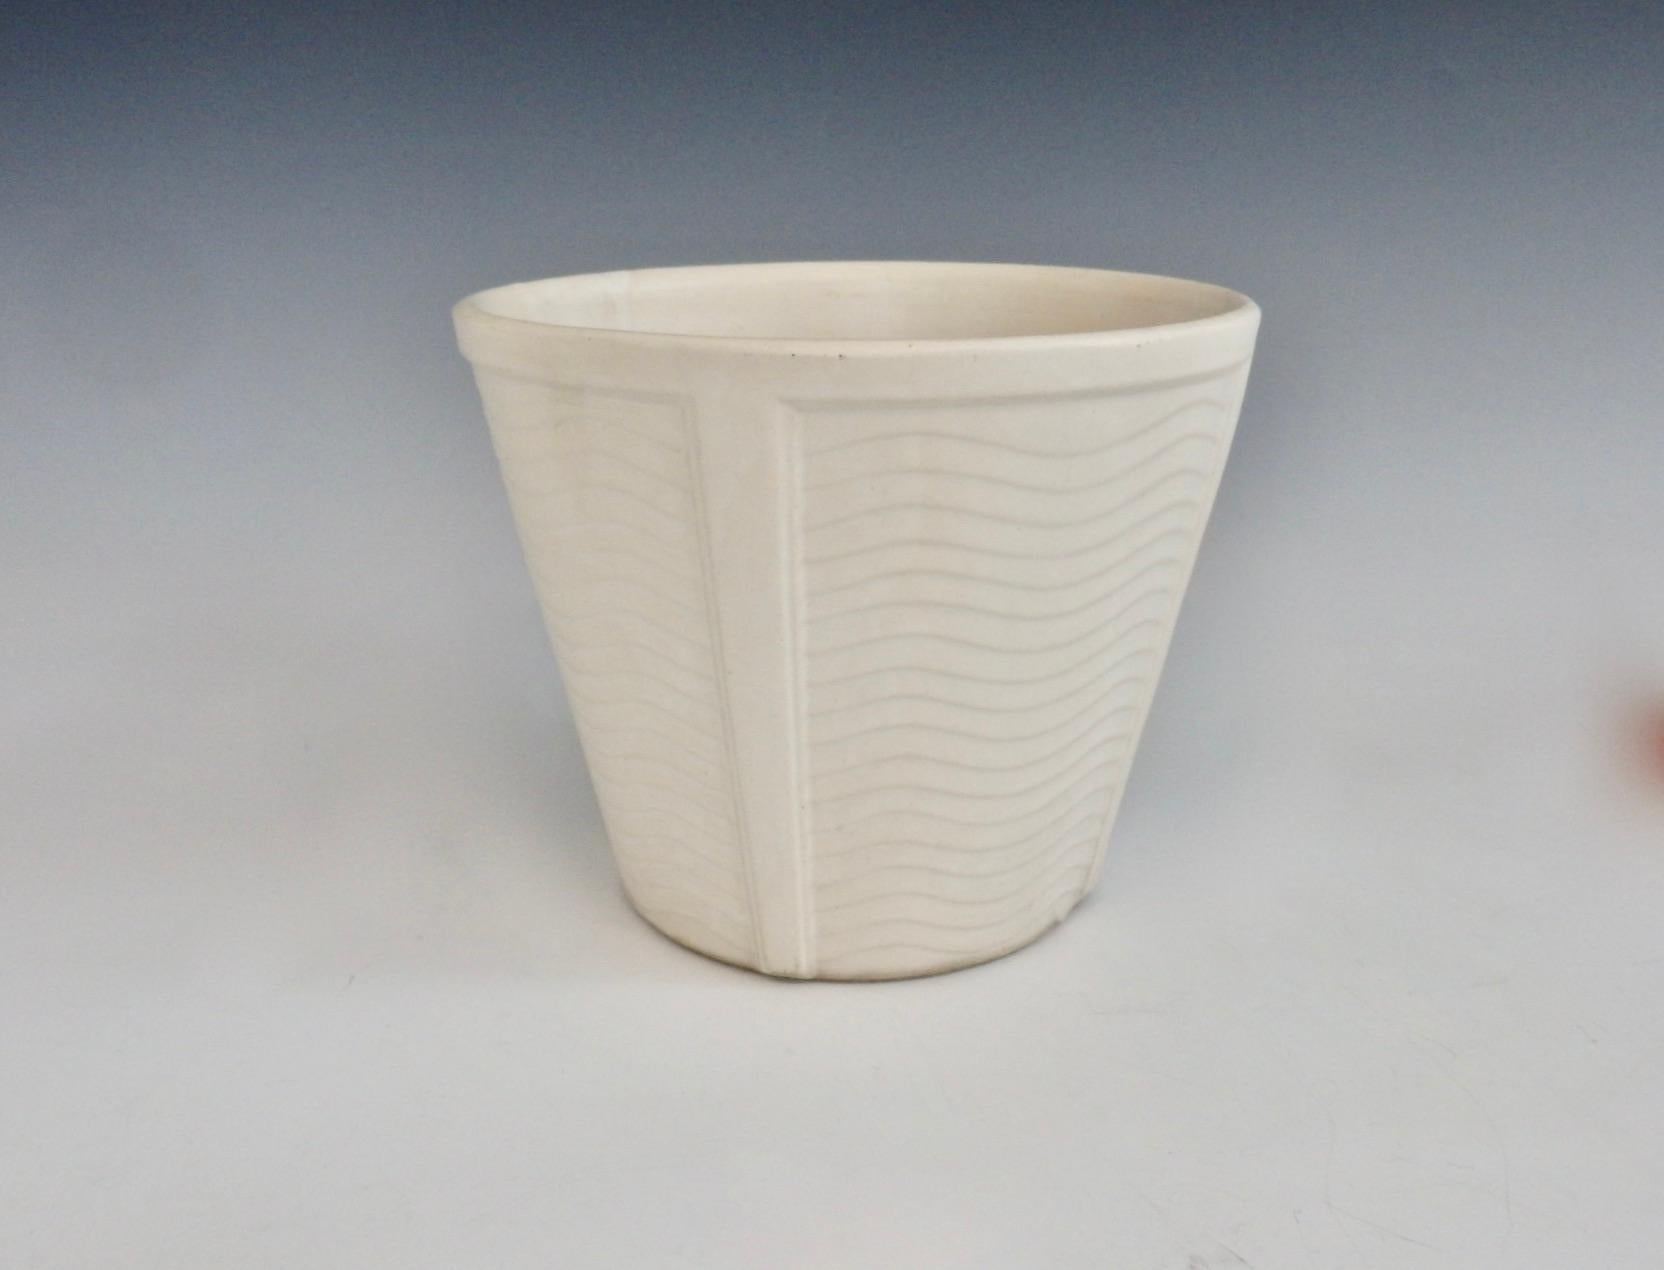 Hand-Crafted Art Deco Wave Design on Heavy Bodied Matte White McCoy Planter Pot